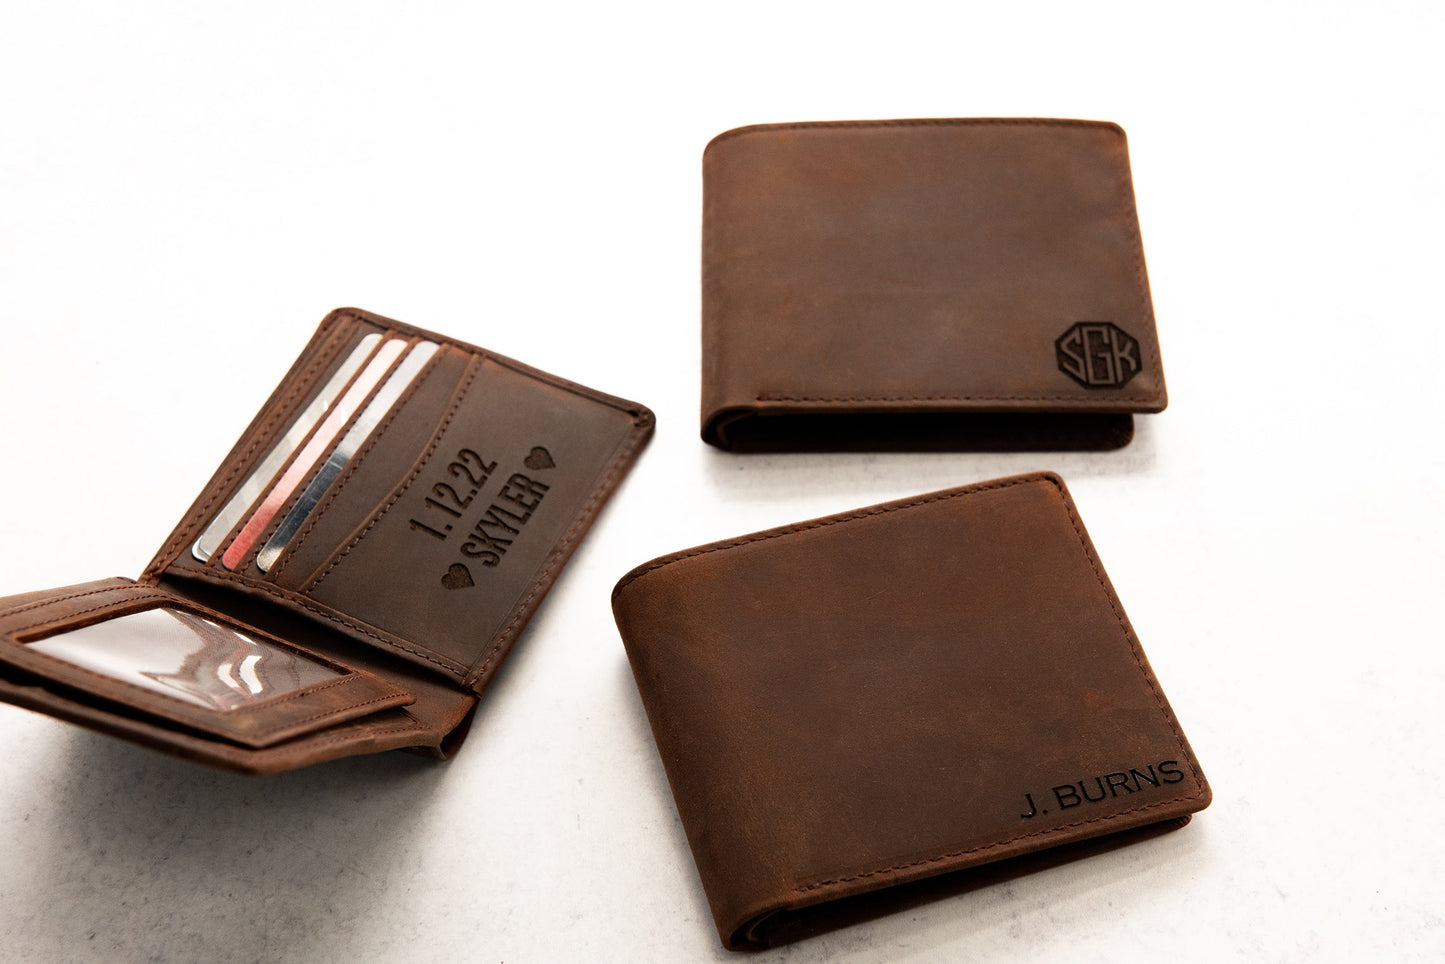 The Clearwater Personalized Leather Trifold Wallet